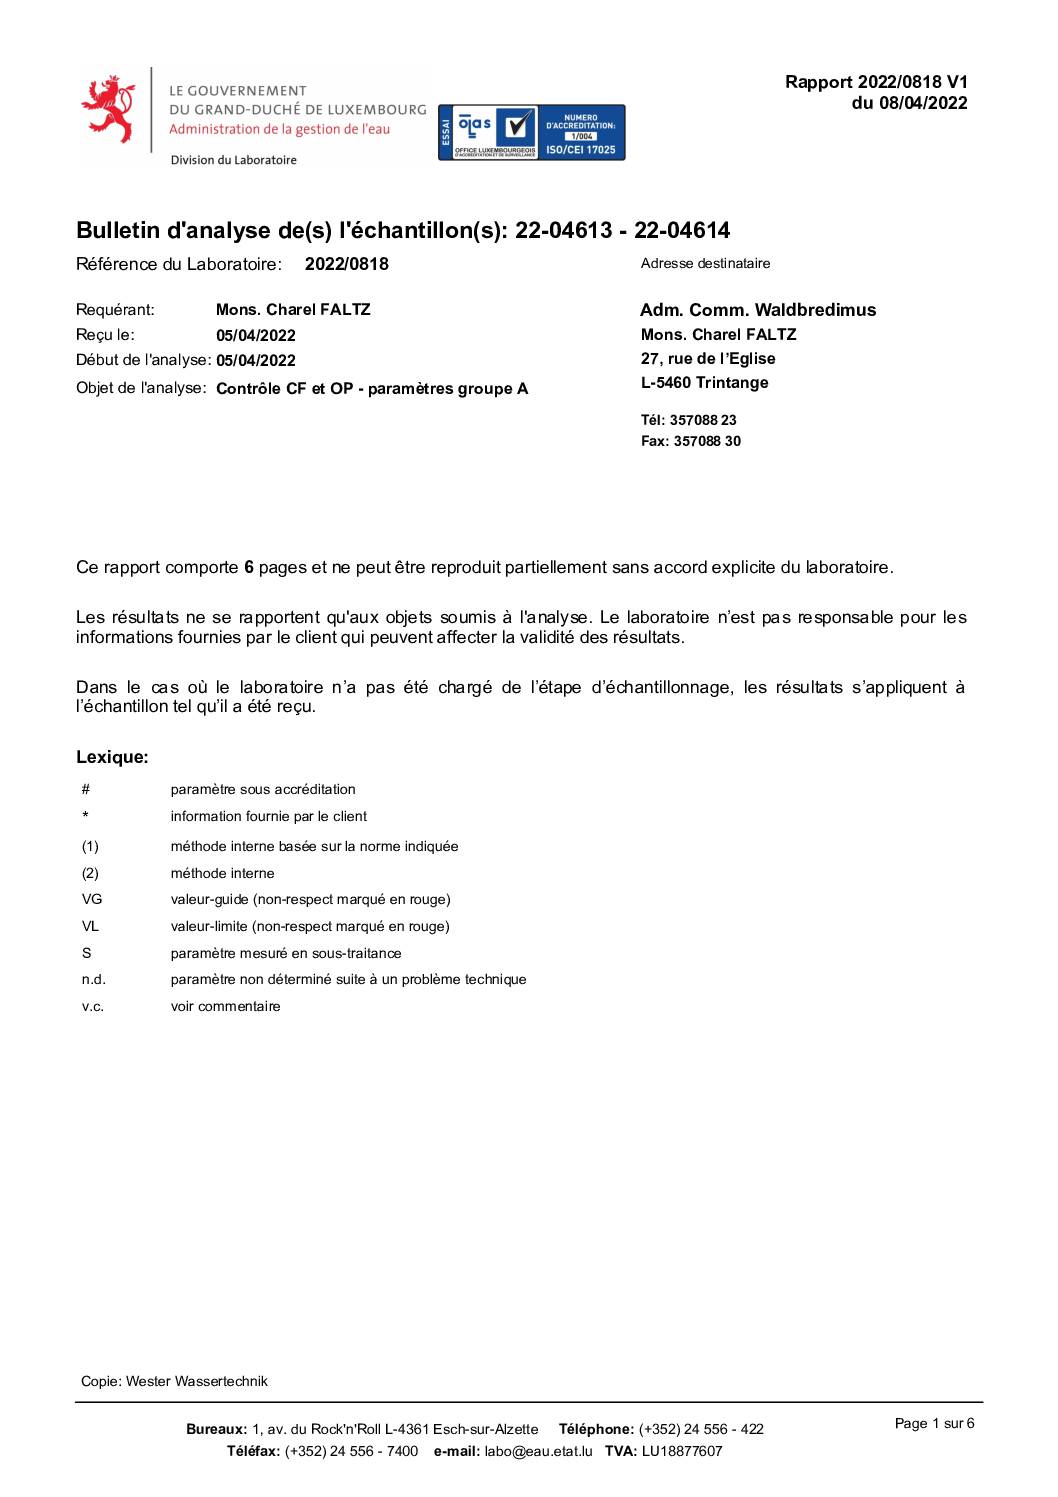 Rapport AGE 05.04.2022